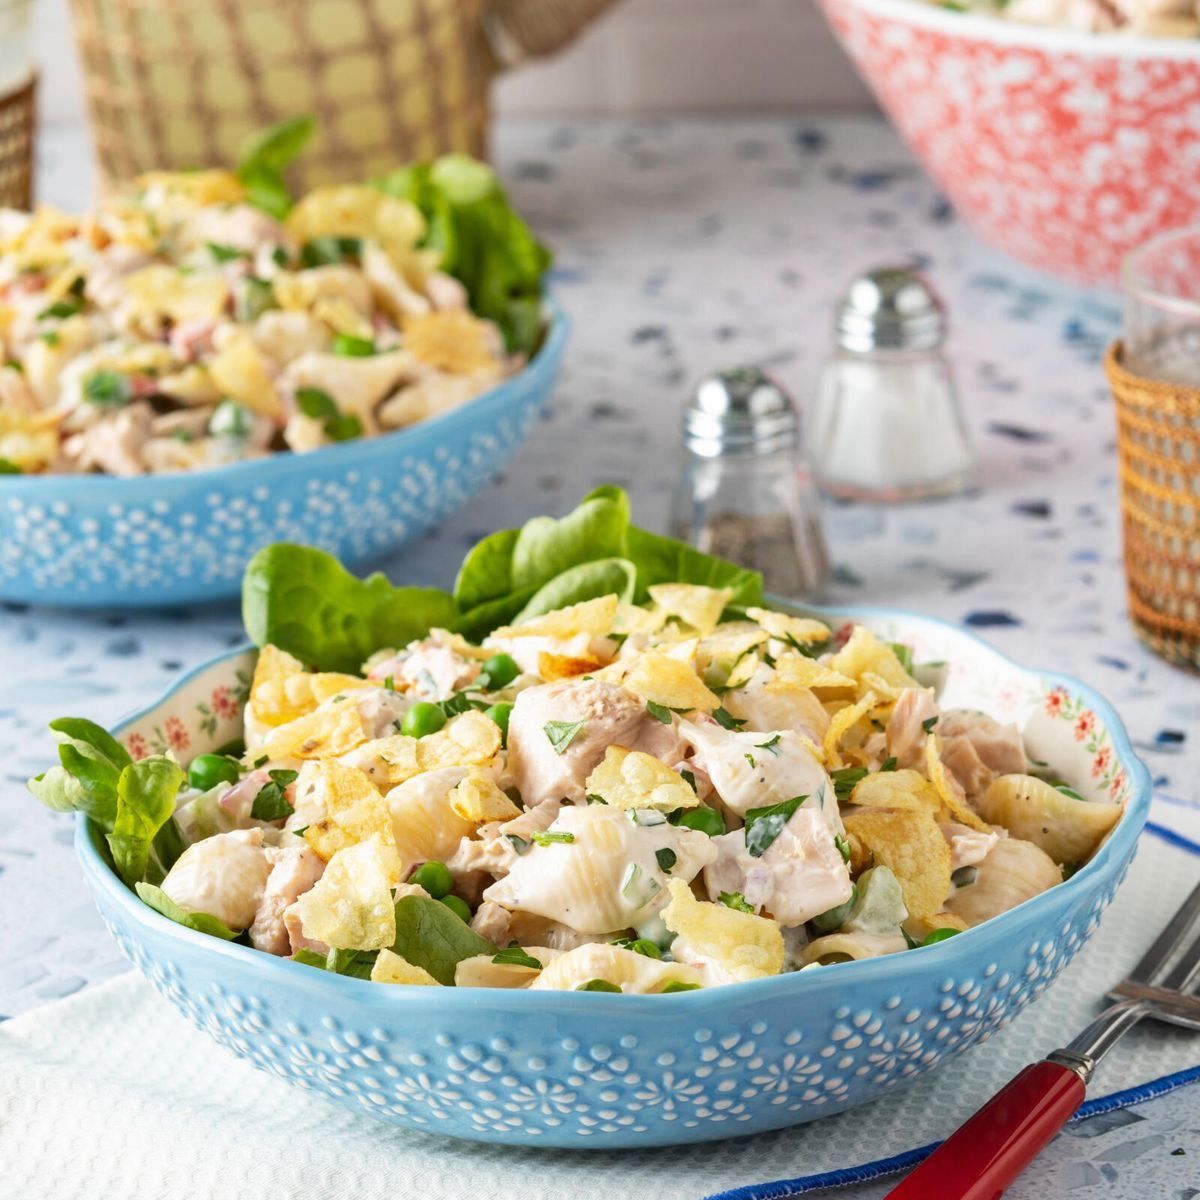 These Healthy Pasta Salads Have *All* the Crunch and Flavor